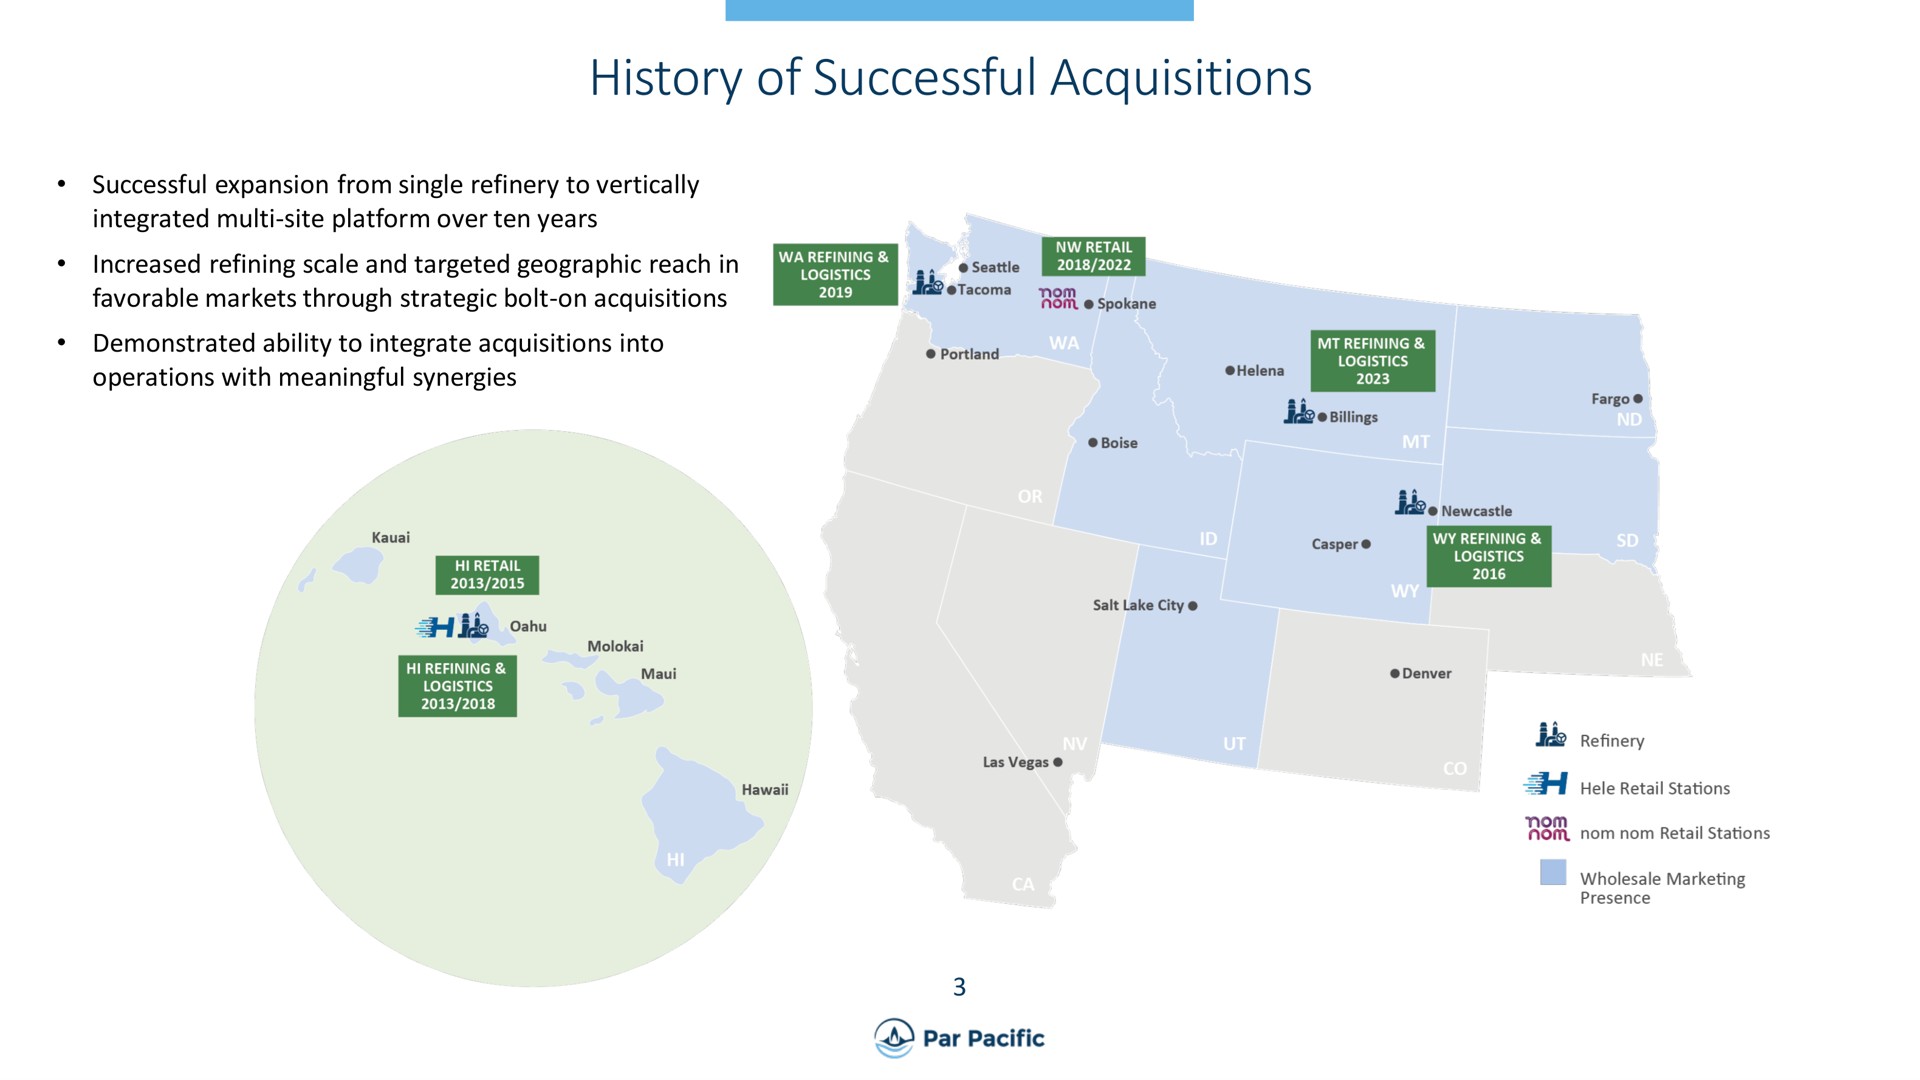 history of successful acquisitions | Par Pacific